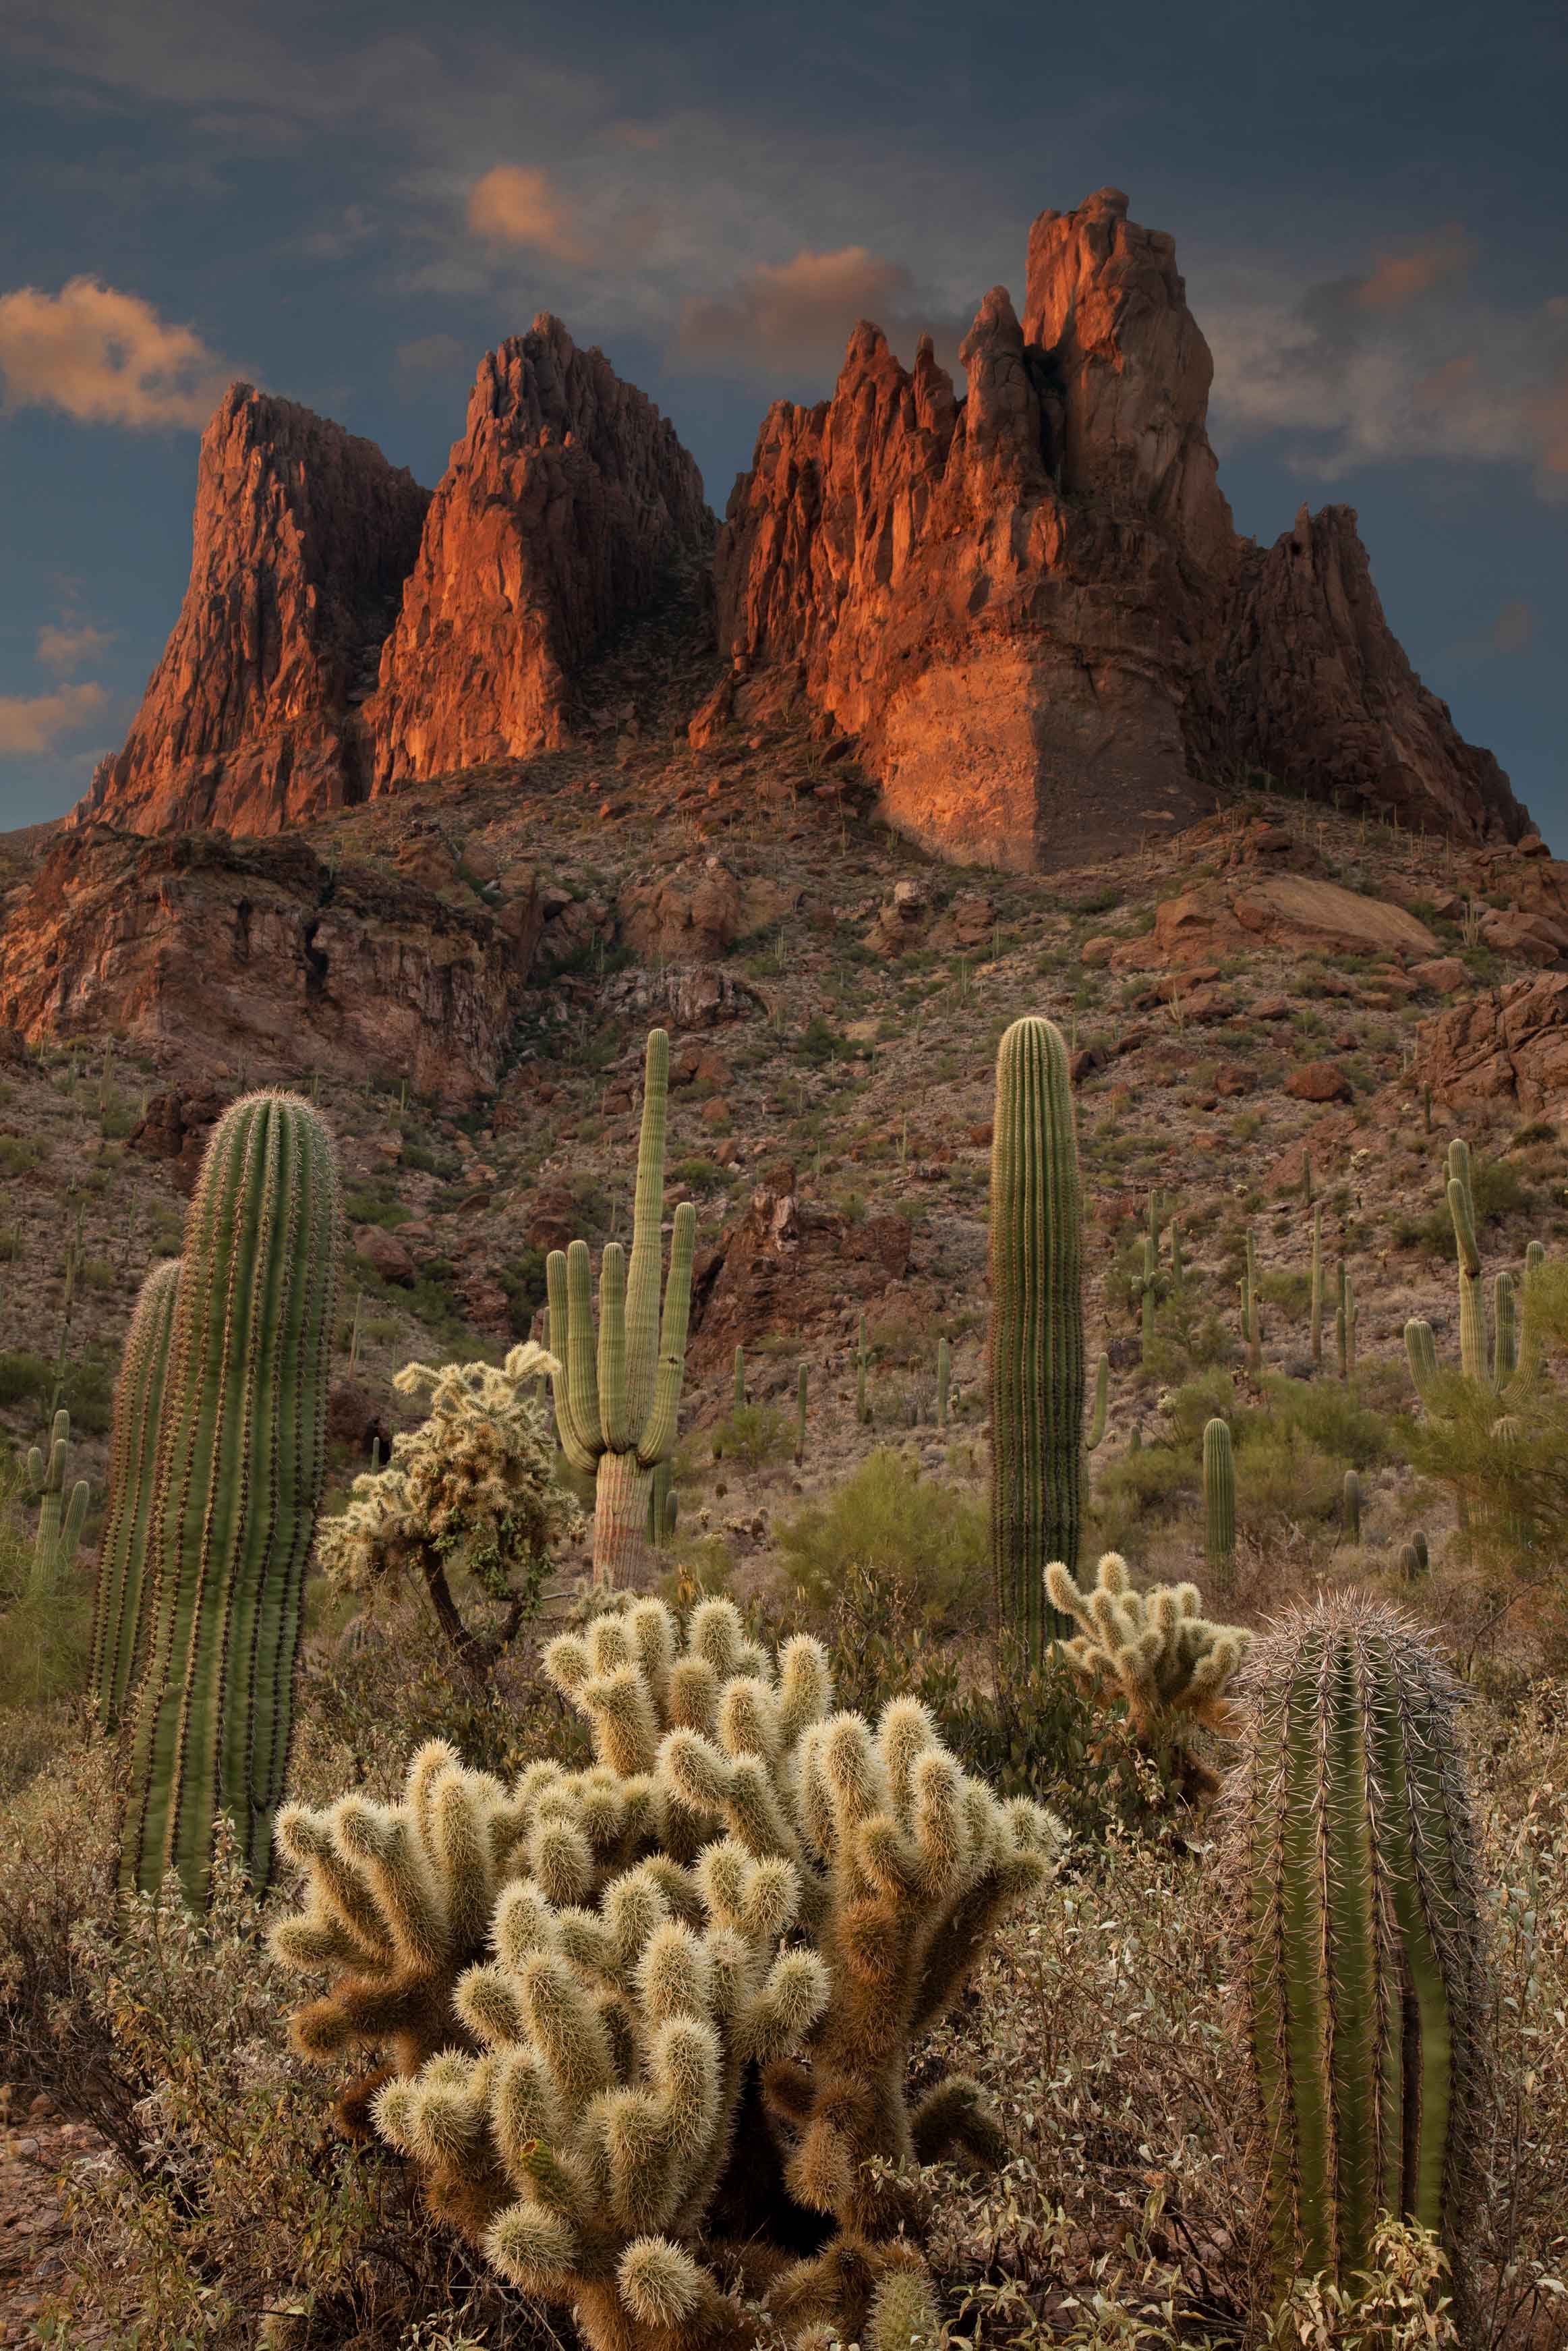 Saguaros and cholla beneath the Three Sisters rock formation in the Superstition Mts., Arizona
